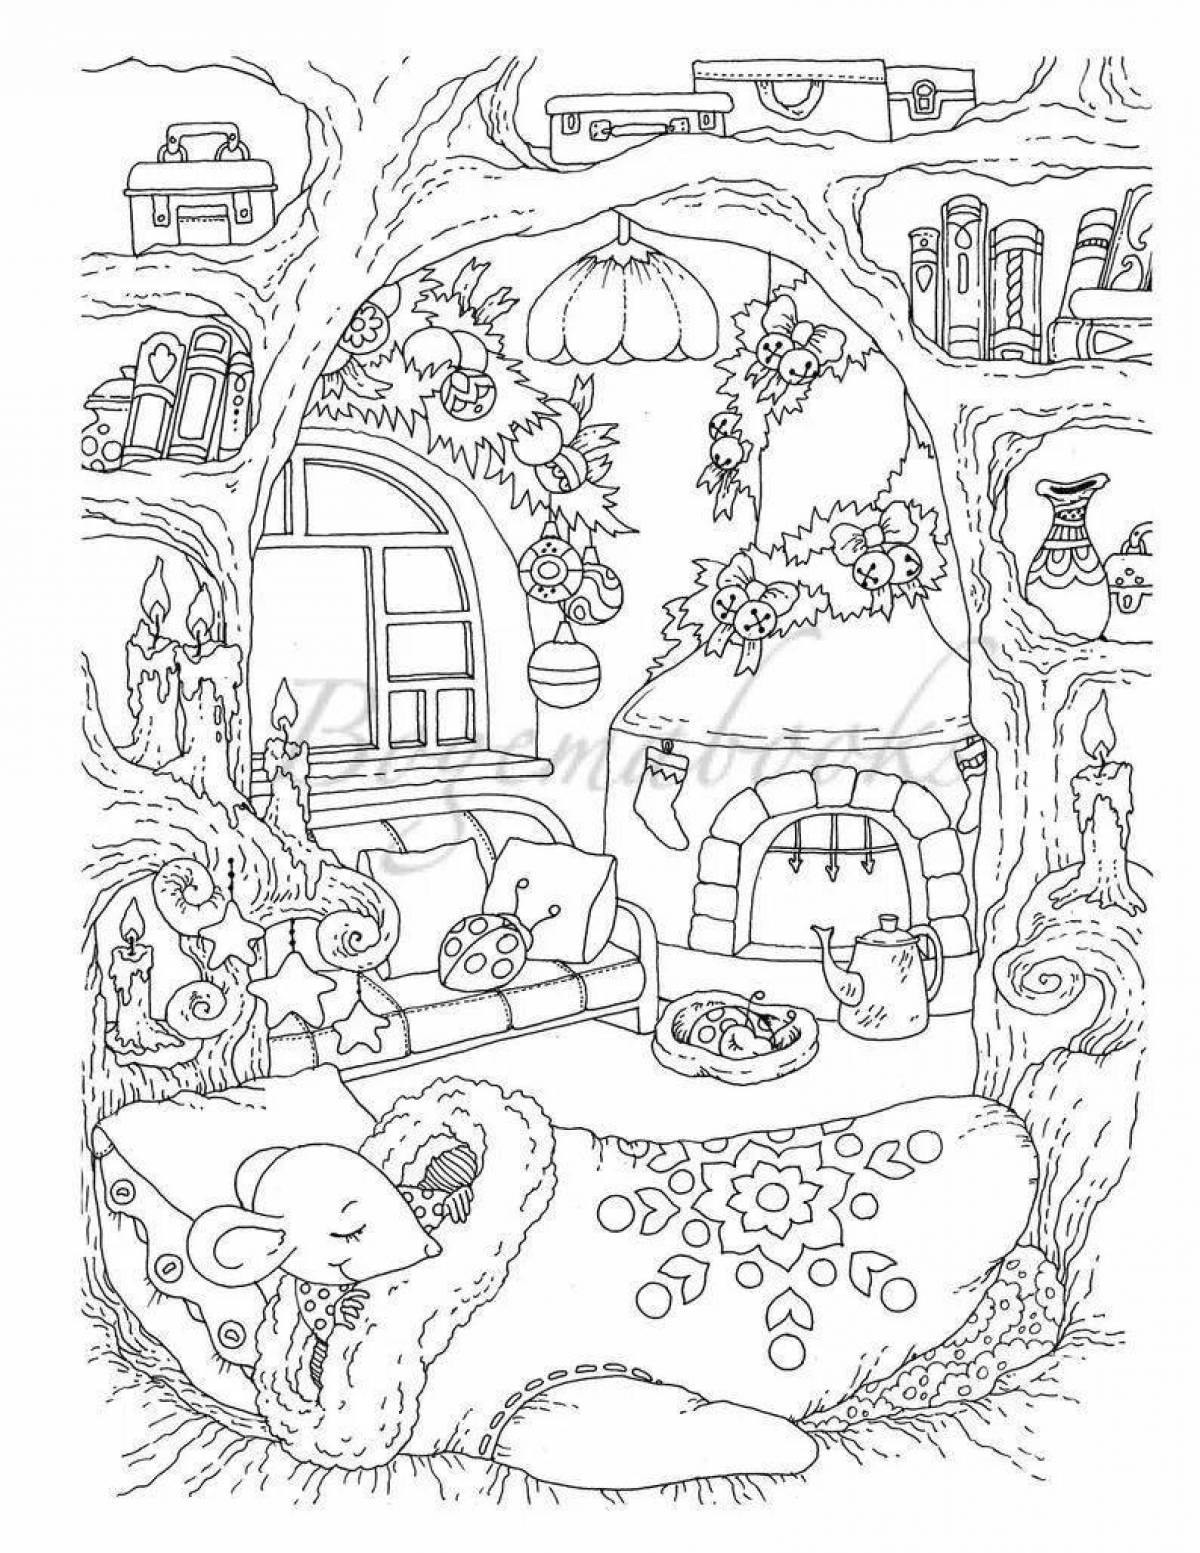 Coloring book refreshing anti-stress houses